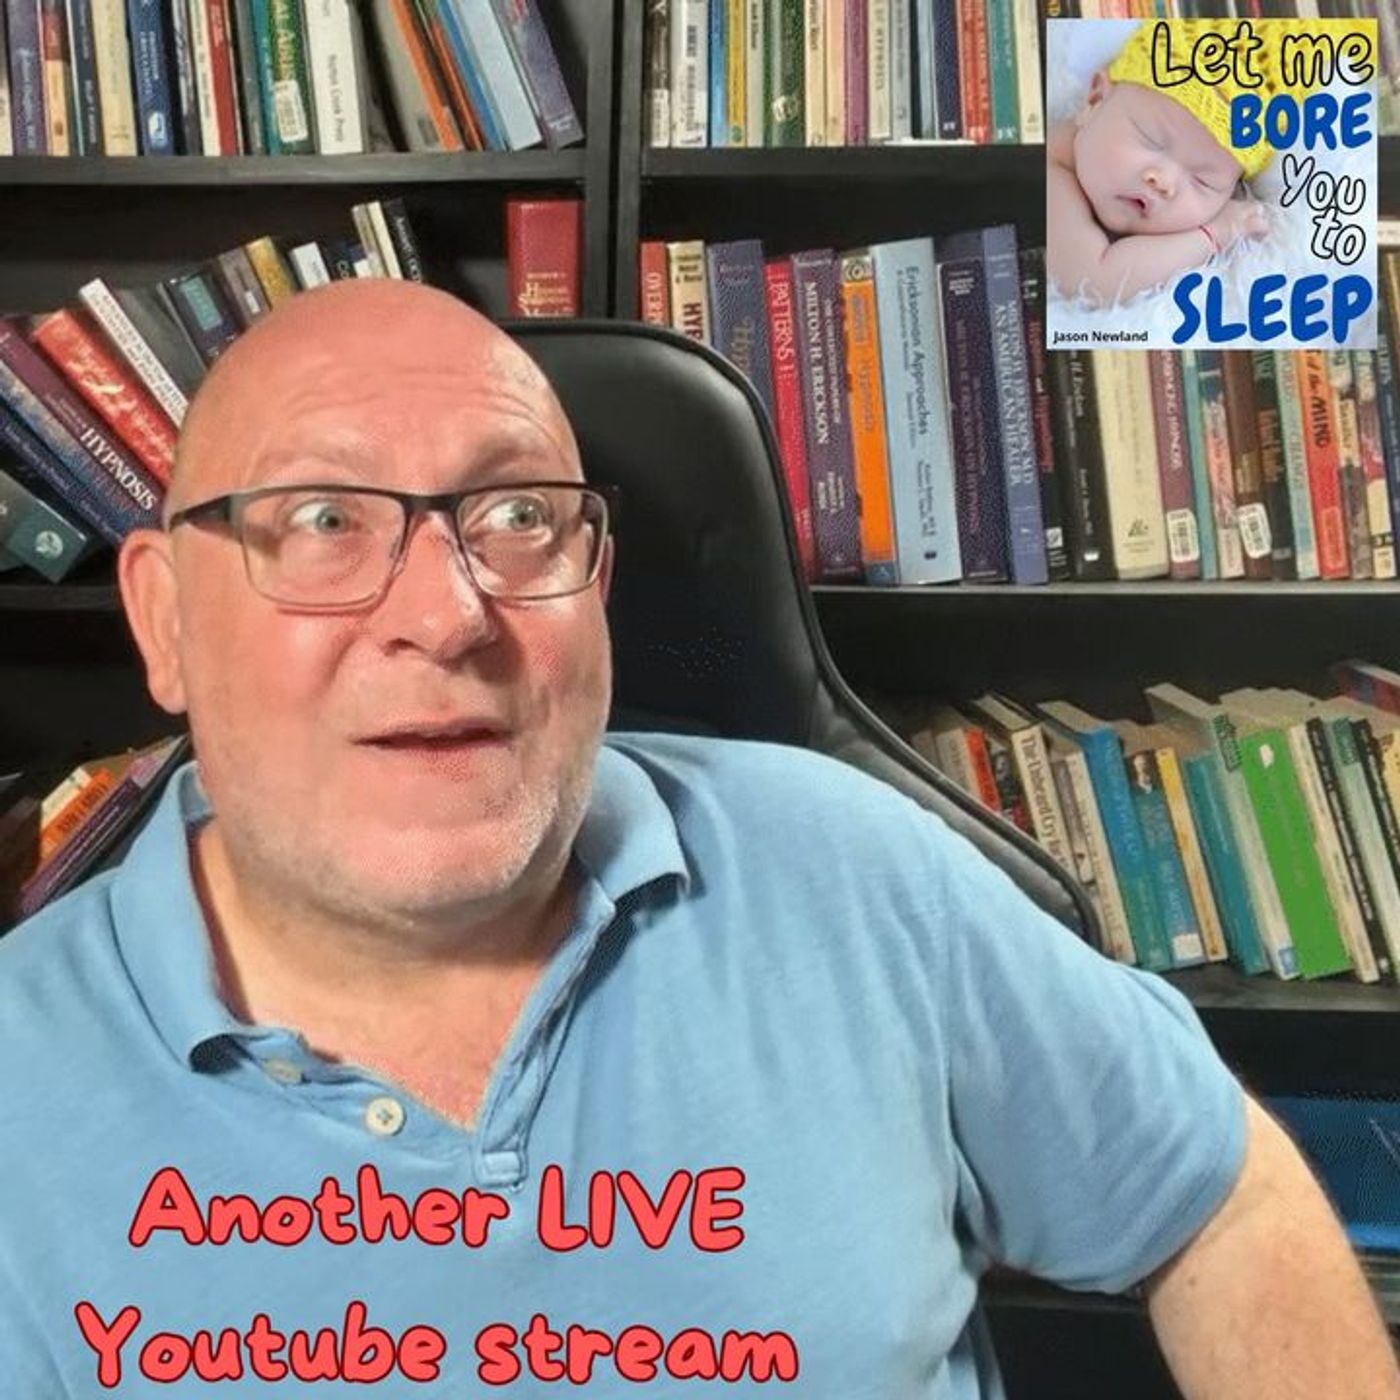 (10 hours) #1033 - Another LIVE Youtube stream - Let me bore you to sleep